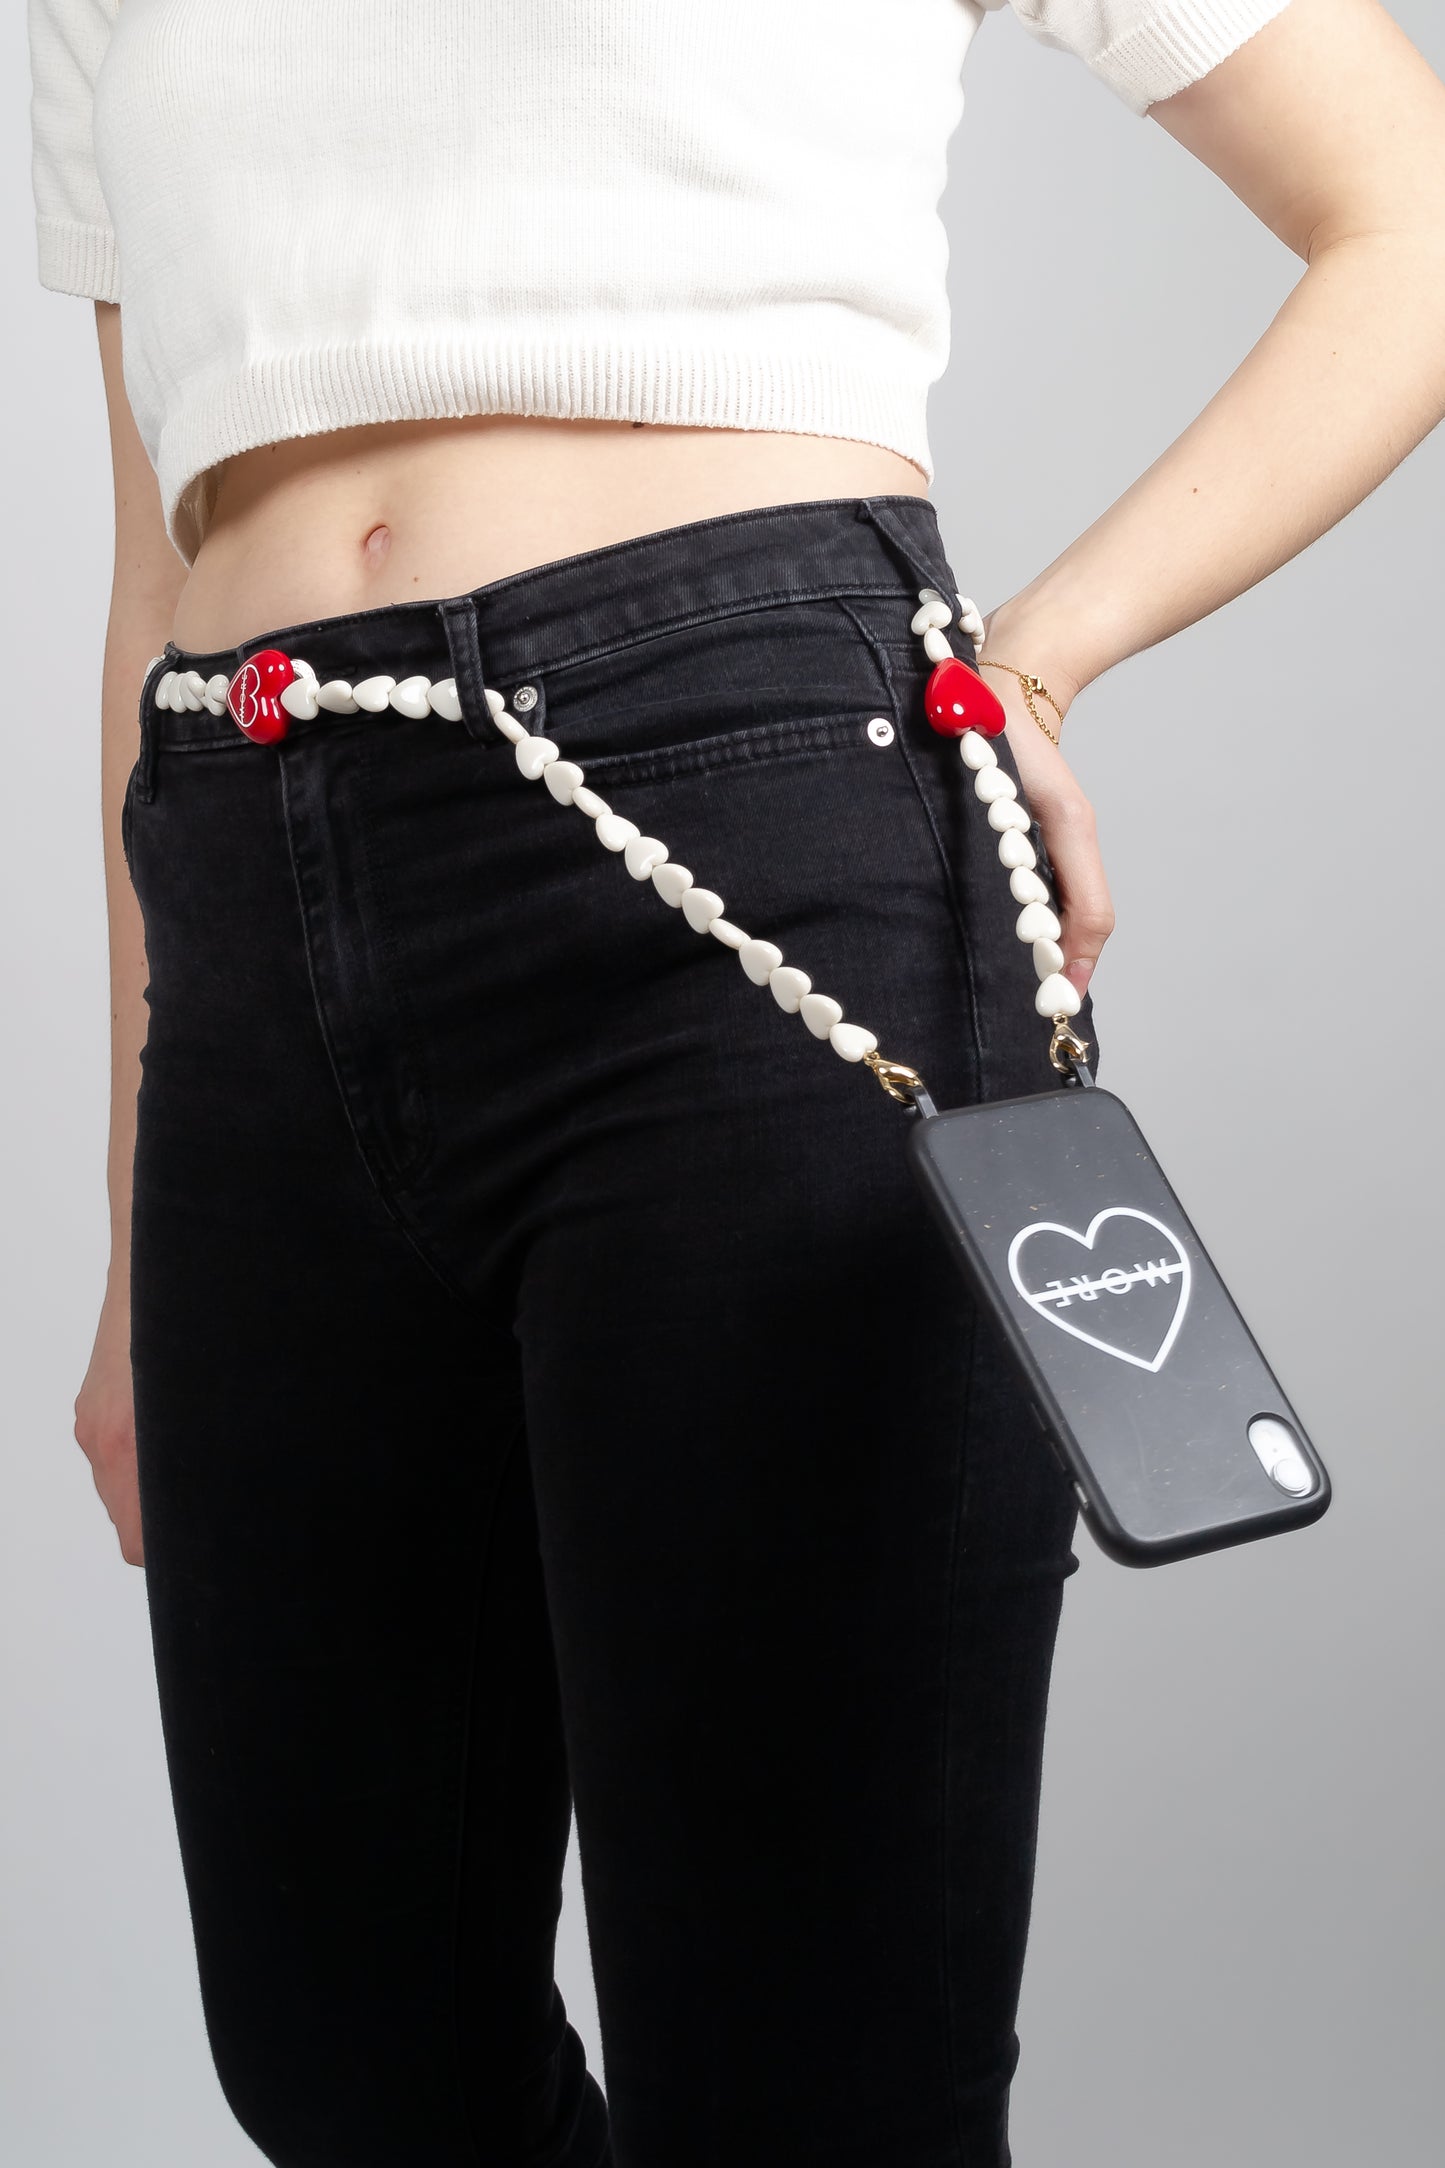 A-MORE Love Drops (not just a Phone Strap)